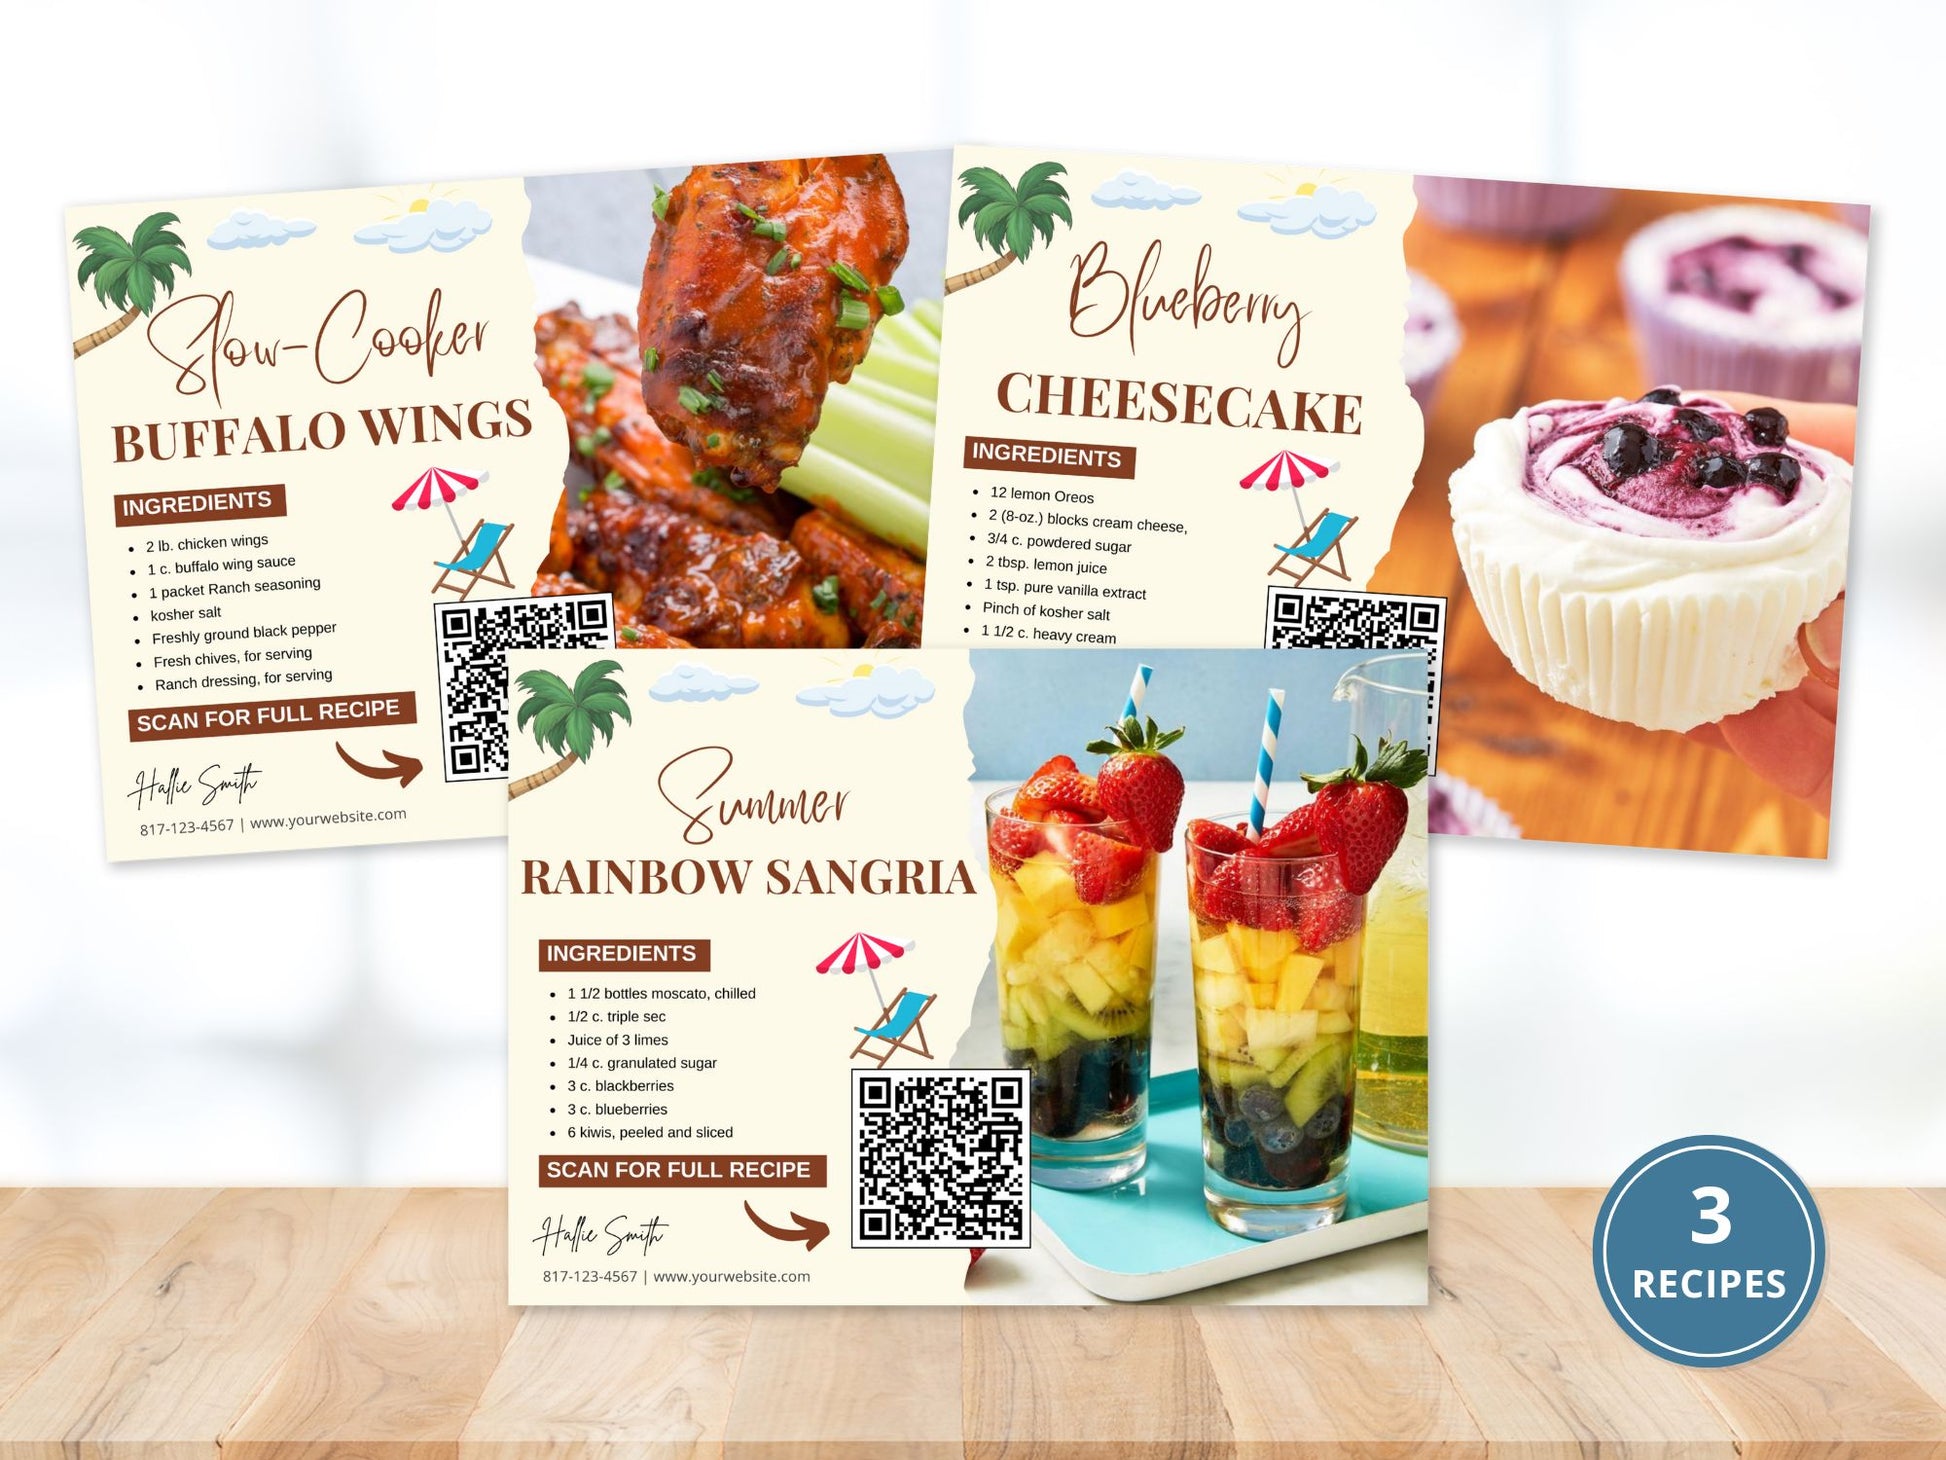 Summer Real Estate Recipe Postcards - Embrace the flavors of the season with refreshing recipes and vibrant postcards.